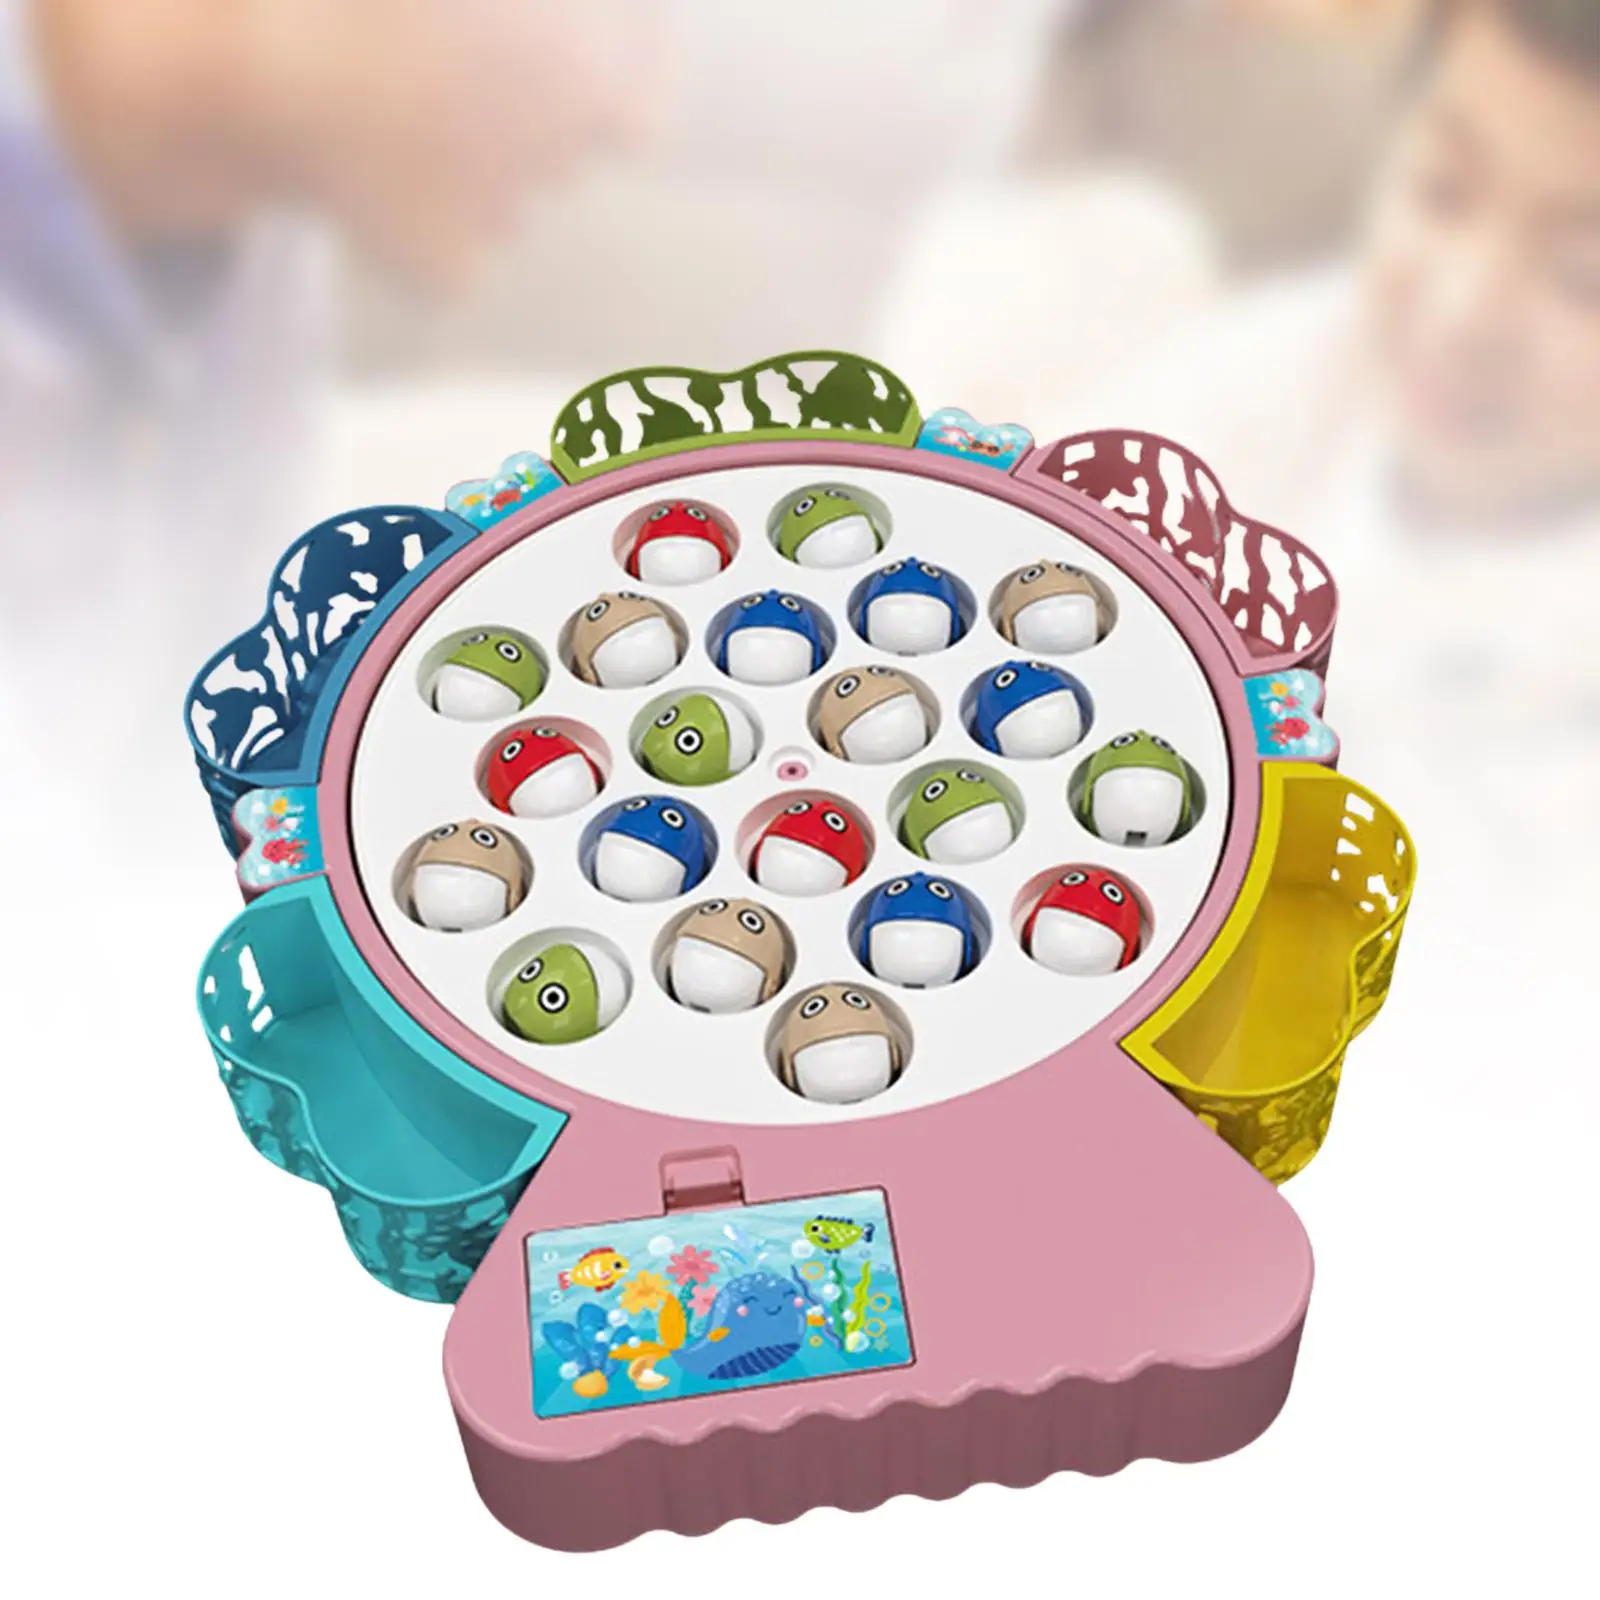 Fishing Game Play Set Birthday Gifts Early Educational Electric Fishing Toy with Music for Preschool Kids Toddlers Age 3 4 5 6 7